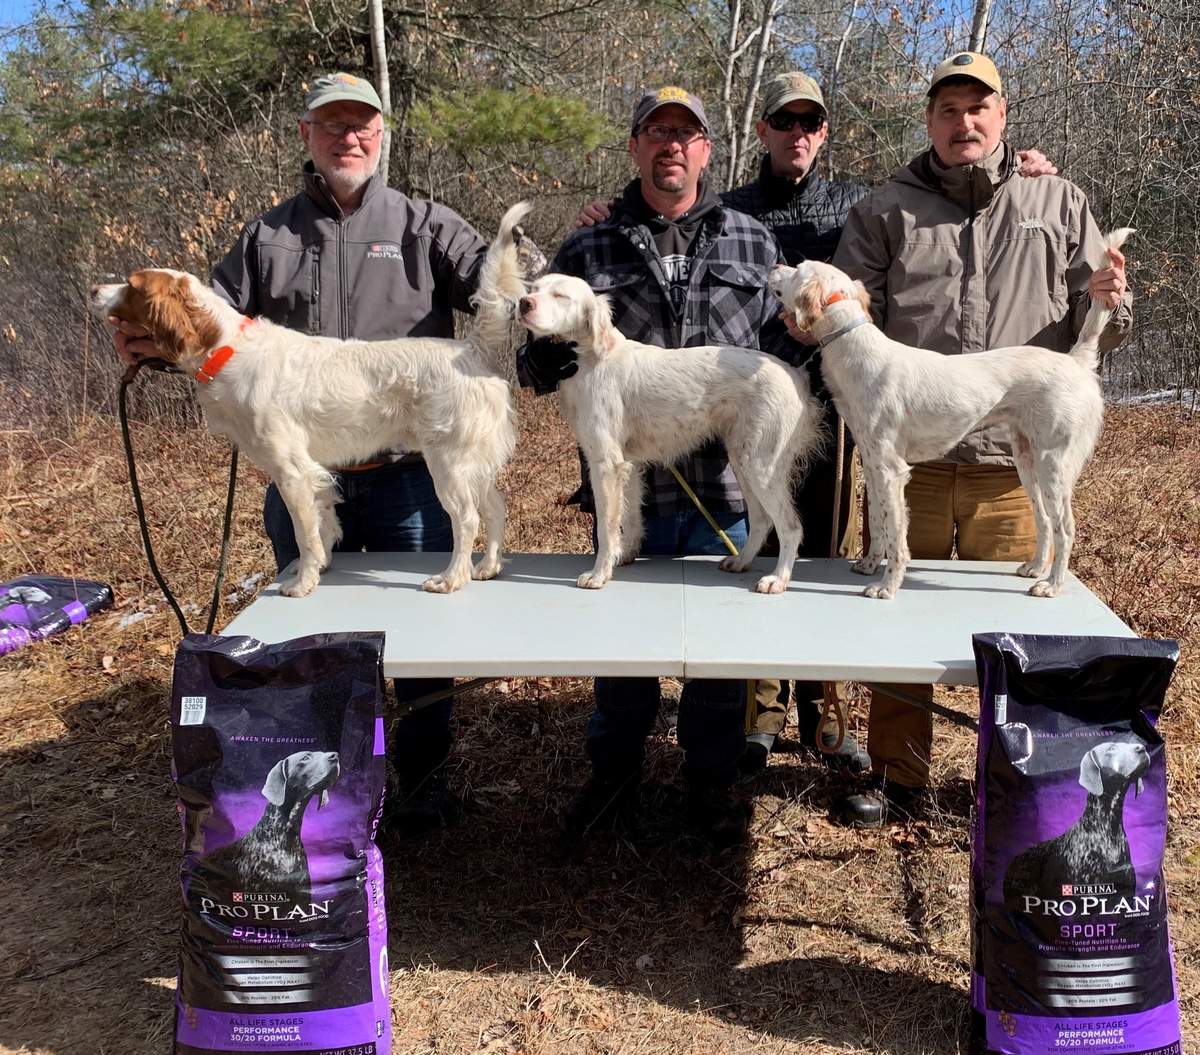 Open Shooting Dog Winners. From left:  Mike Luebke with Rebellious Fearless Fred, Tim Kaufman with Northern Slopes Bell, Ed Graddy (behind) and Sig Degitz with Northern Slopes Allie